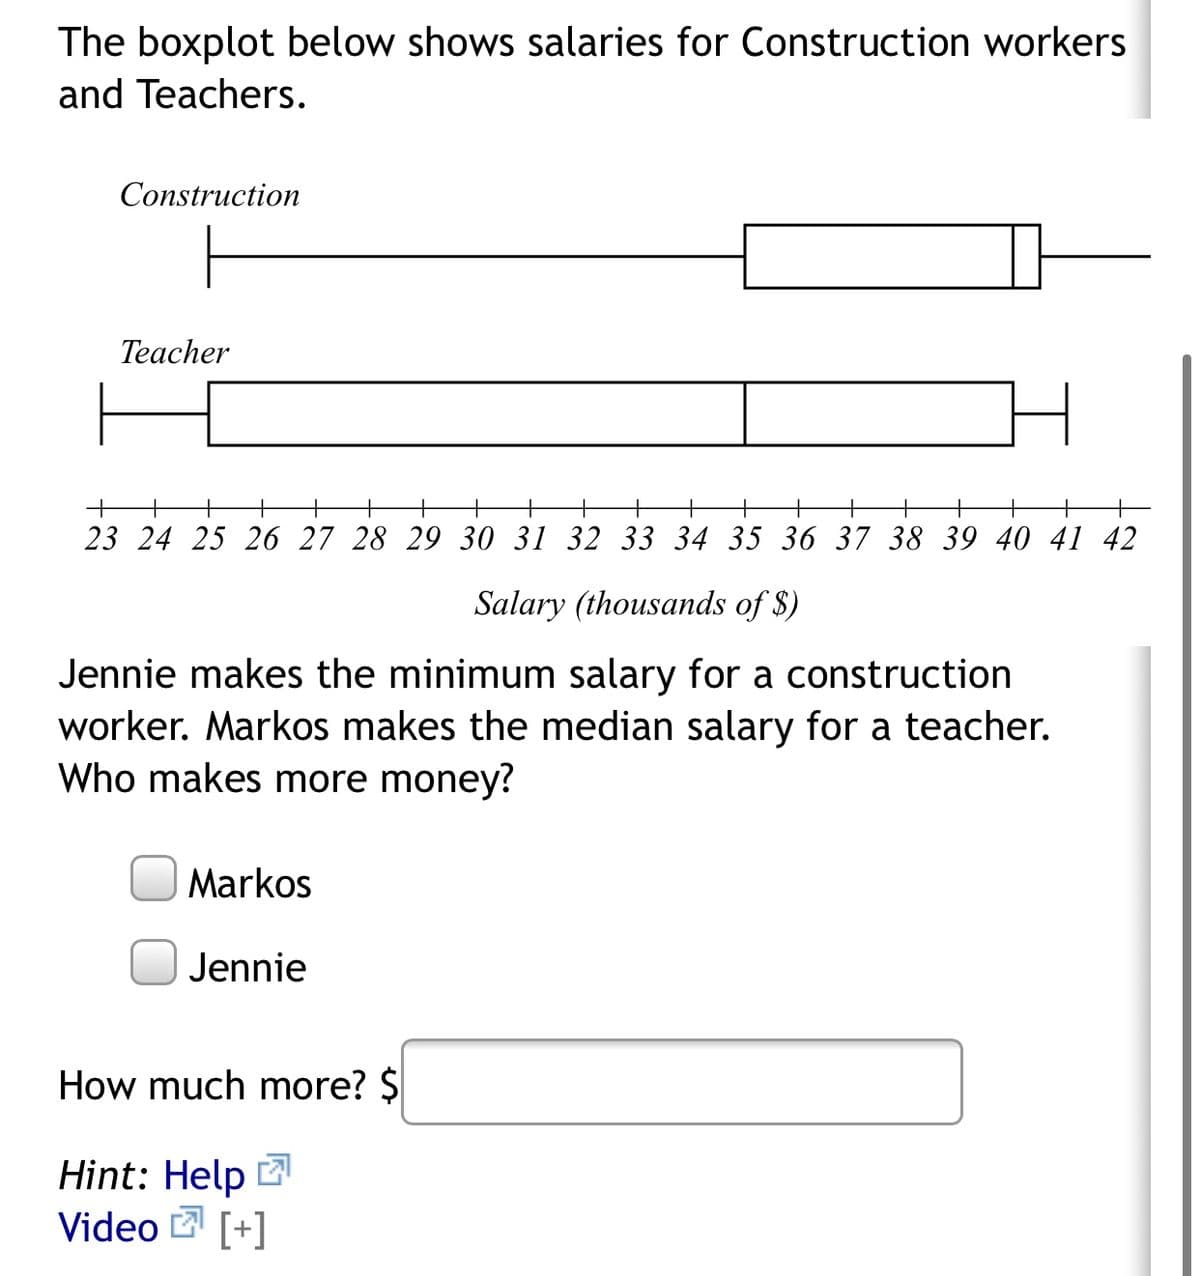 The boxplot below shows salaries for Construction workers
and Teachers.
Construction
Теacher
+
+
23 24 25 26 27 28 29 30 31 32 33 34 35 36 37 38 39 40 41 42
Salary (thousands of $)
Jennie makes the minimum salary for a construction
worker. Markos makes the median salary for a teacher.
Who makes more money?
Markos
Jennie
How much more? $
Hint: Help
Video [+]
